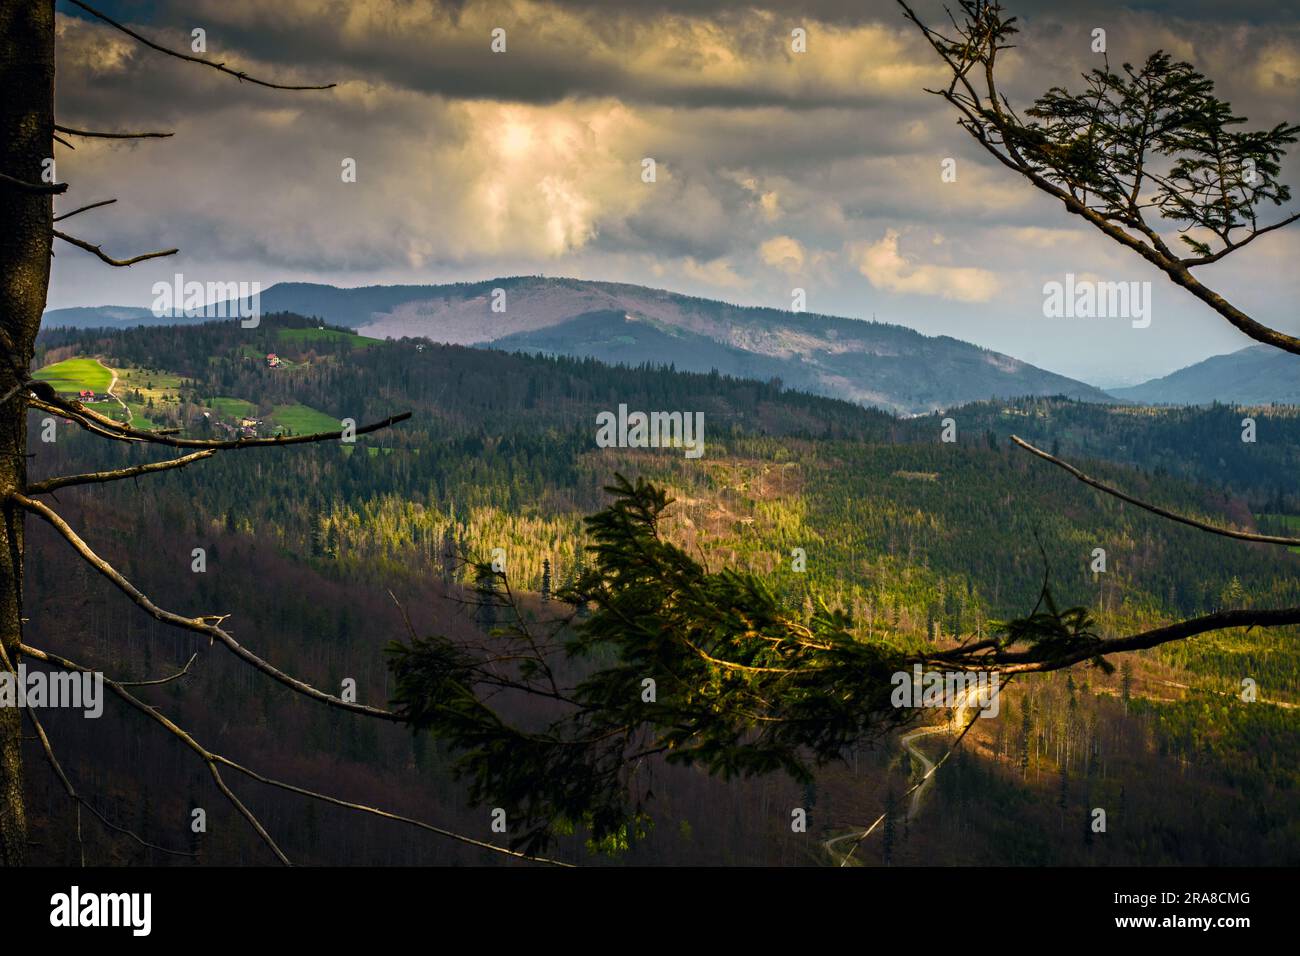 Forested Beskid Mountains on the Main Beskid Trail, Silesian Voivodeship, Poland. Stock Photo